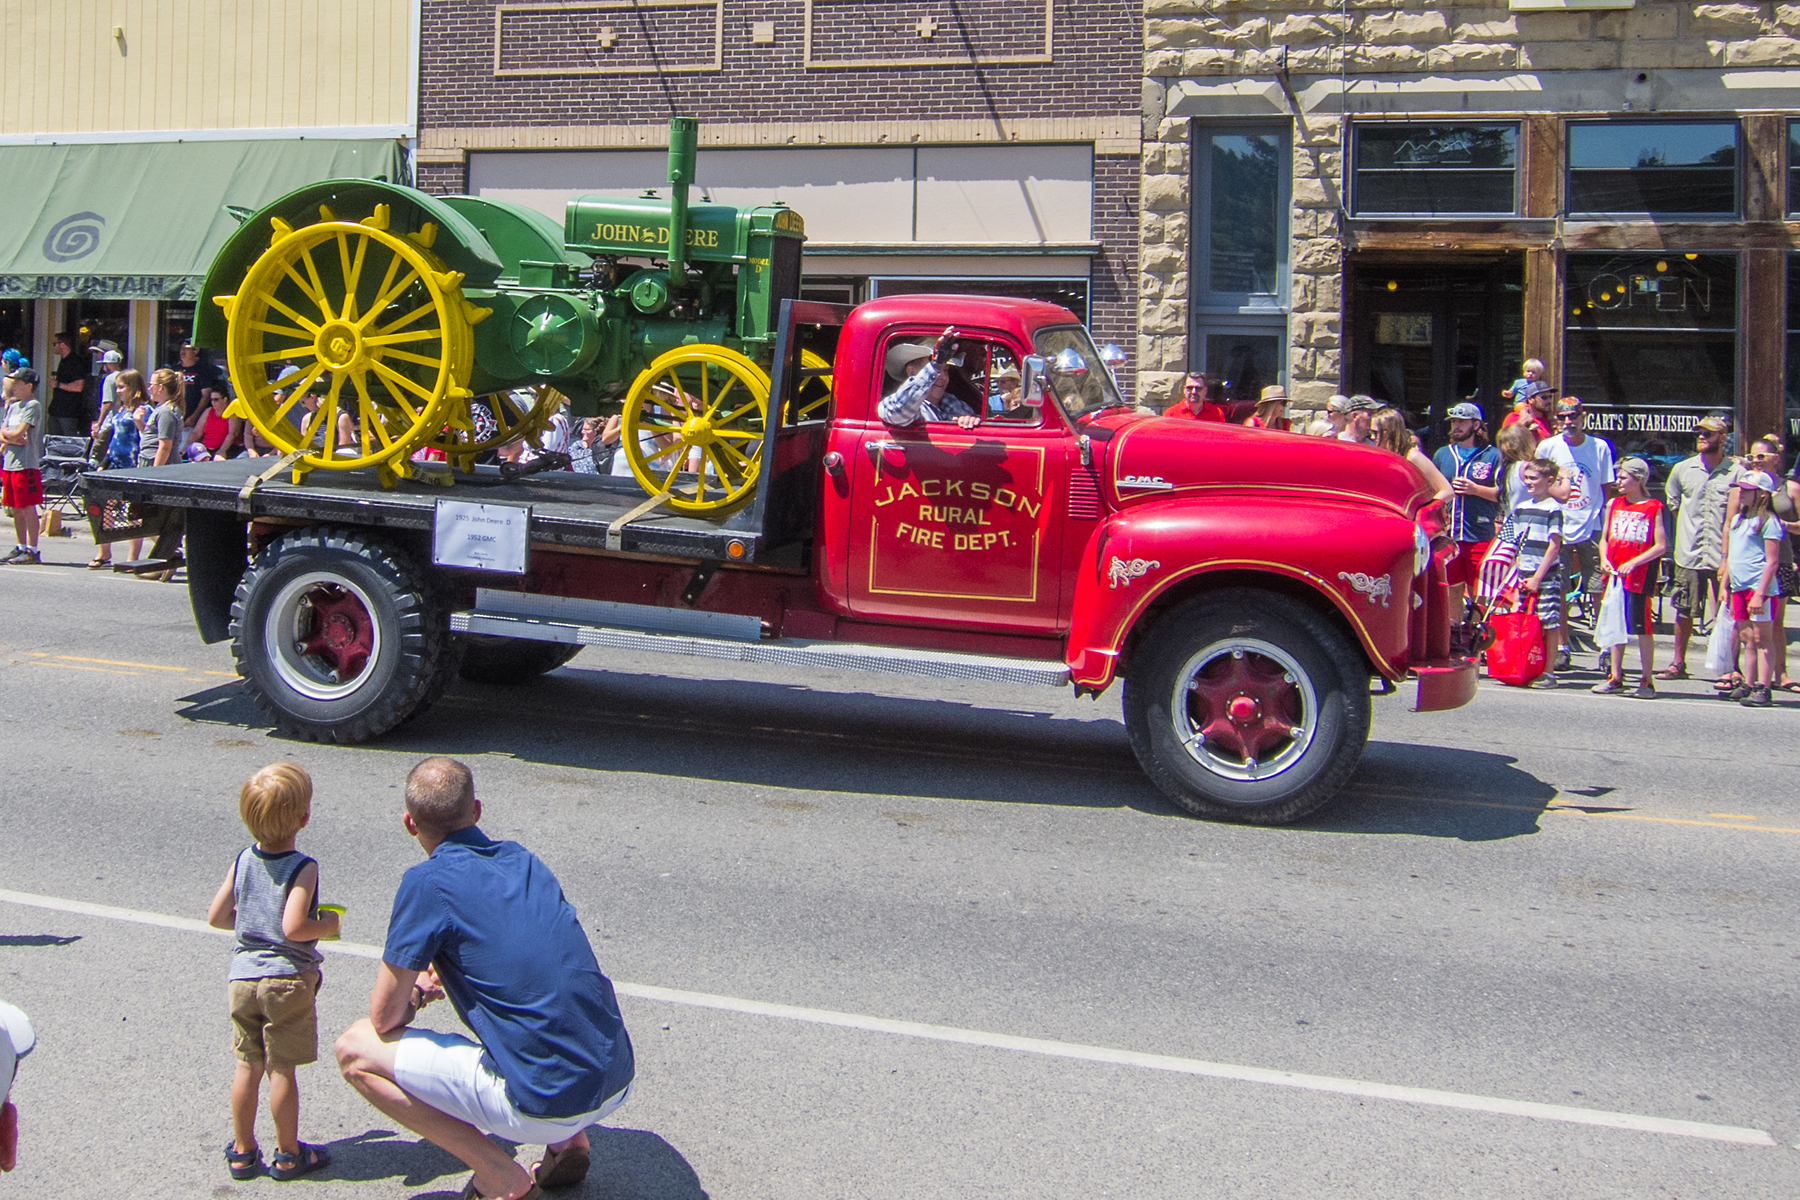 4th of July rodeo parade, Red Lodge, MT.  1925 John Deere tractor on the back of the truck.  Click for next photo.